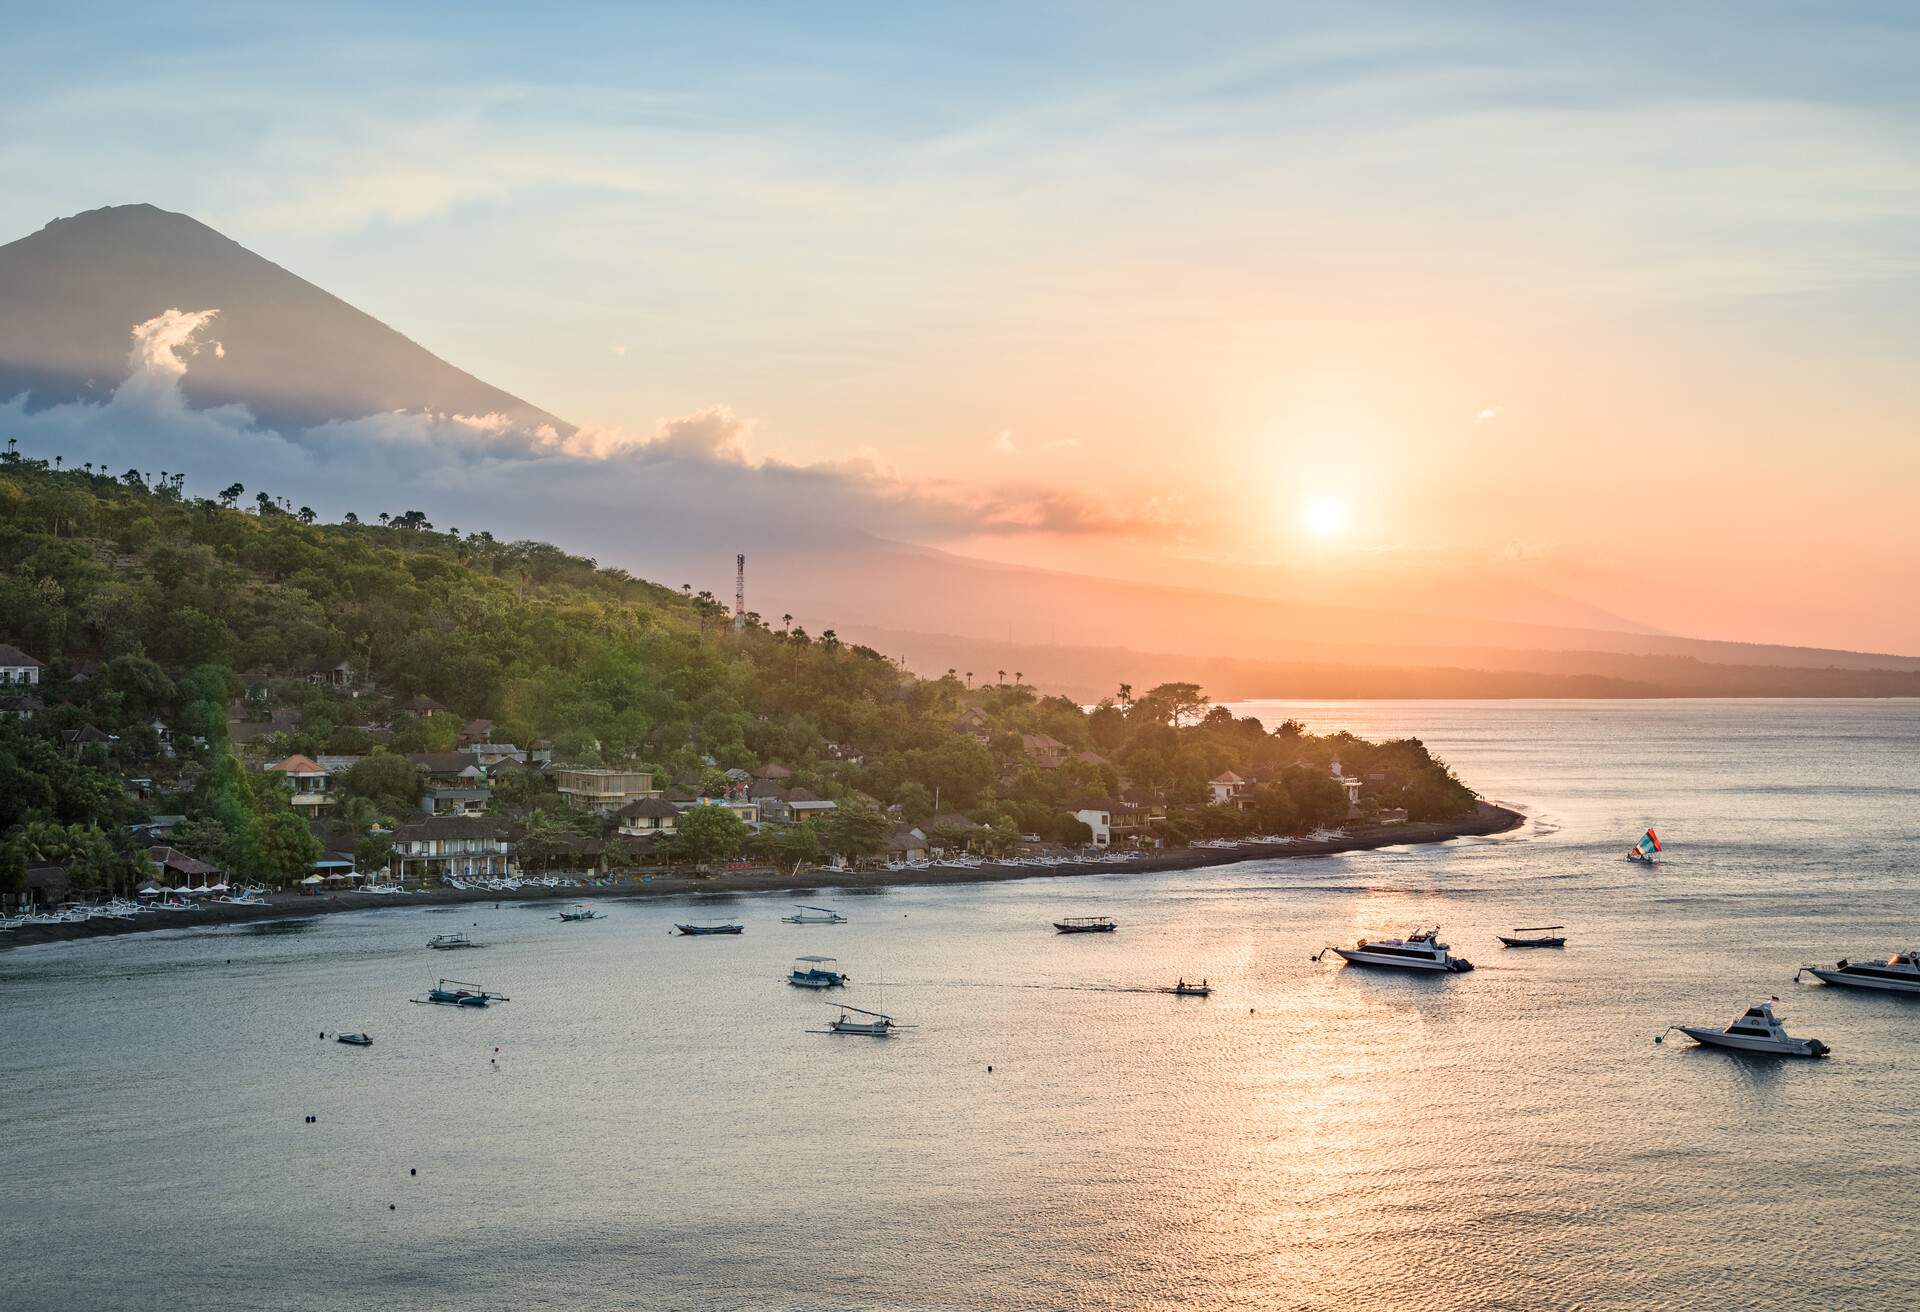 Landscape of Bali north coastline at sunrise, with Mount Agung volcano peak and forest slopes, and Java sea, from hilltop near Amed, Bali, Indonesia